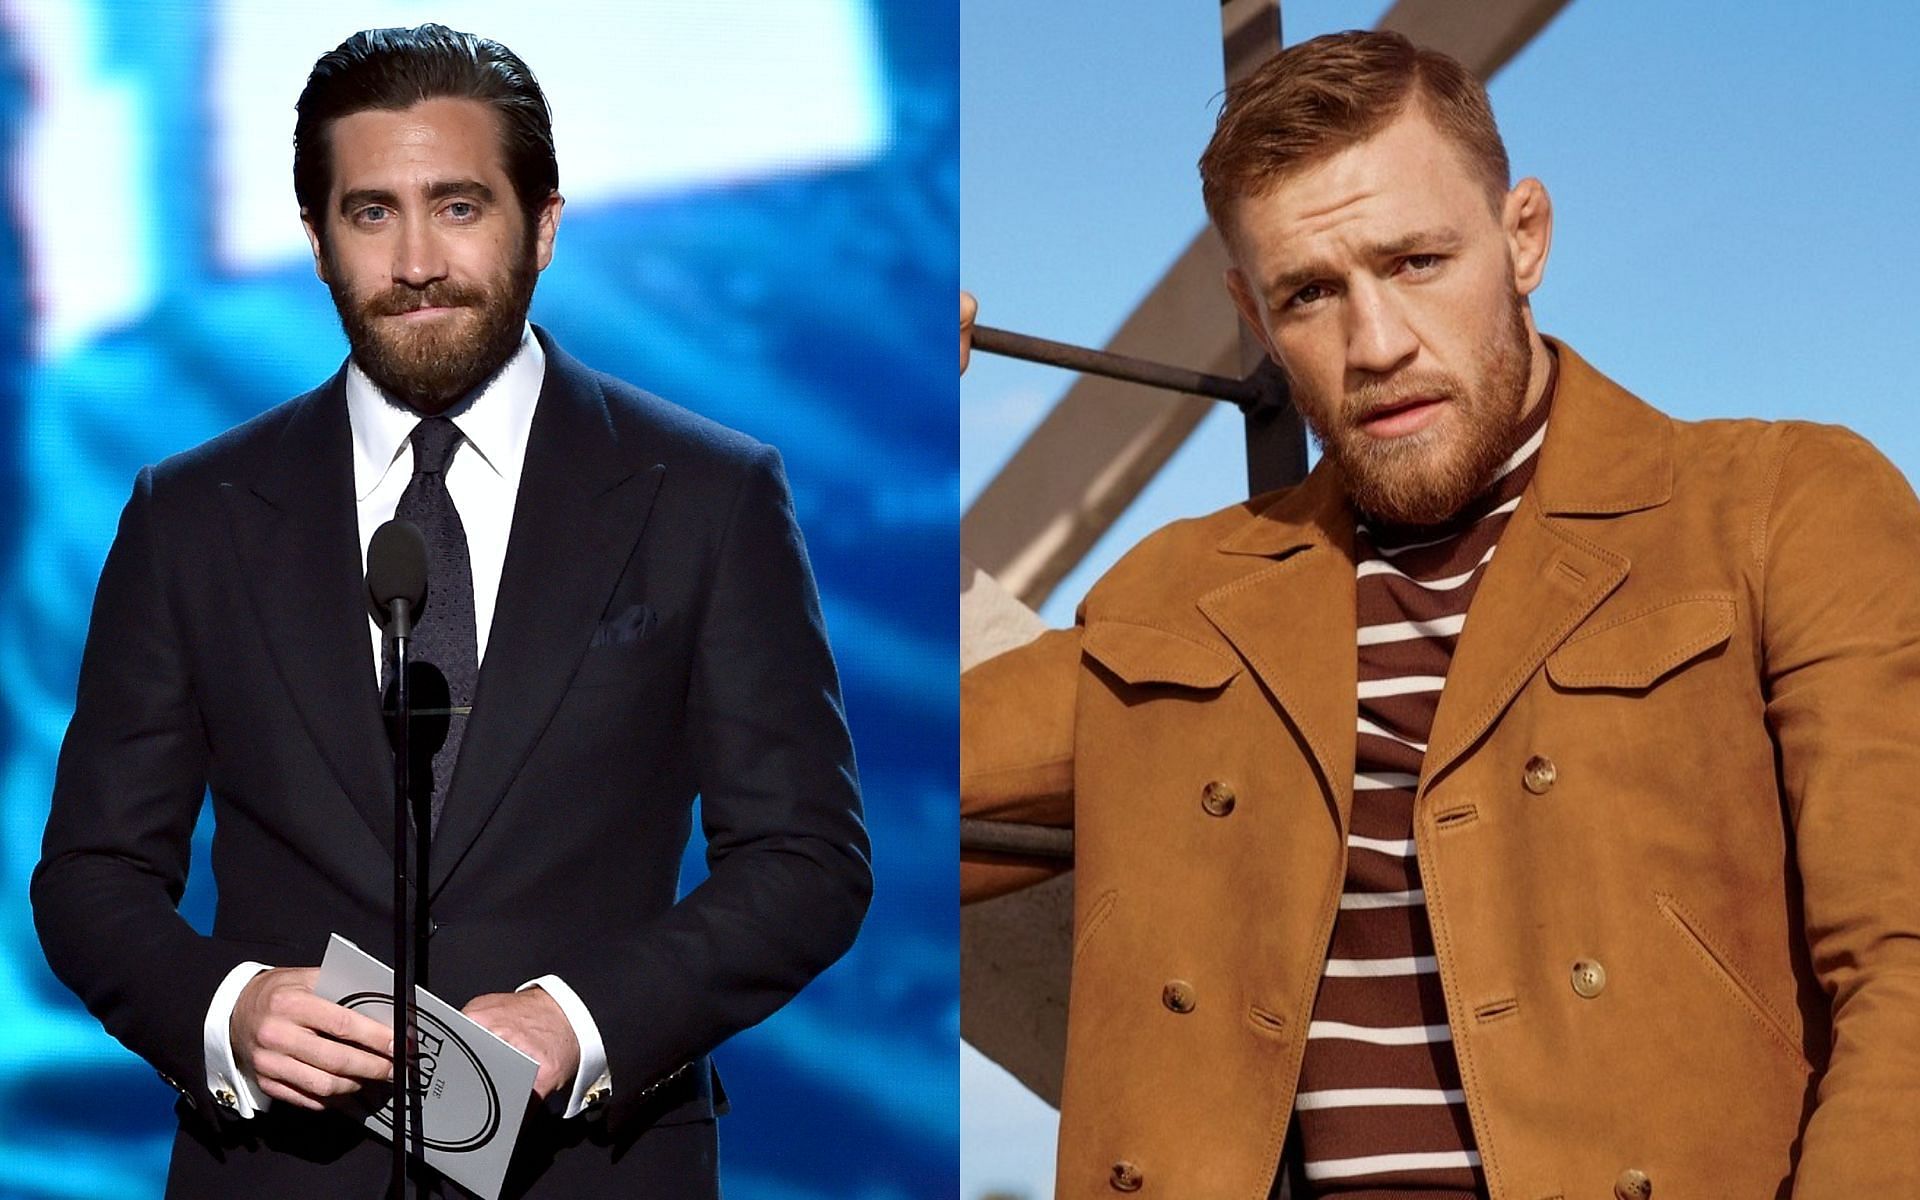 Jake Gyllenhaal (left) and Conor McGregor (right) [Image Courtesy: Getty Images and GQ Magazine]